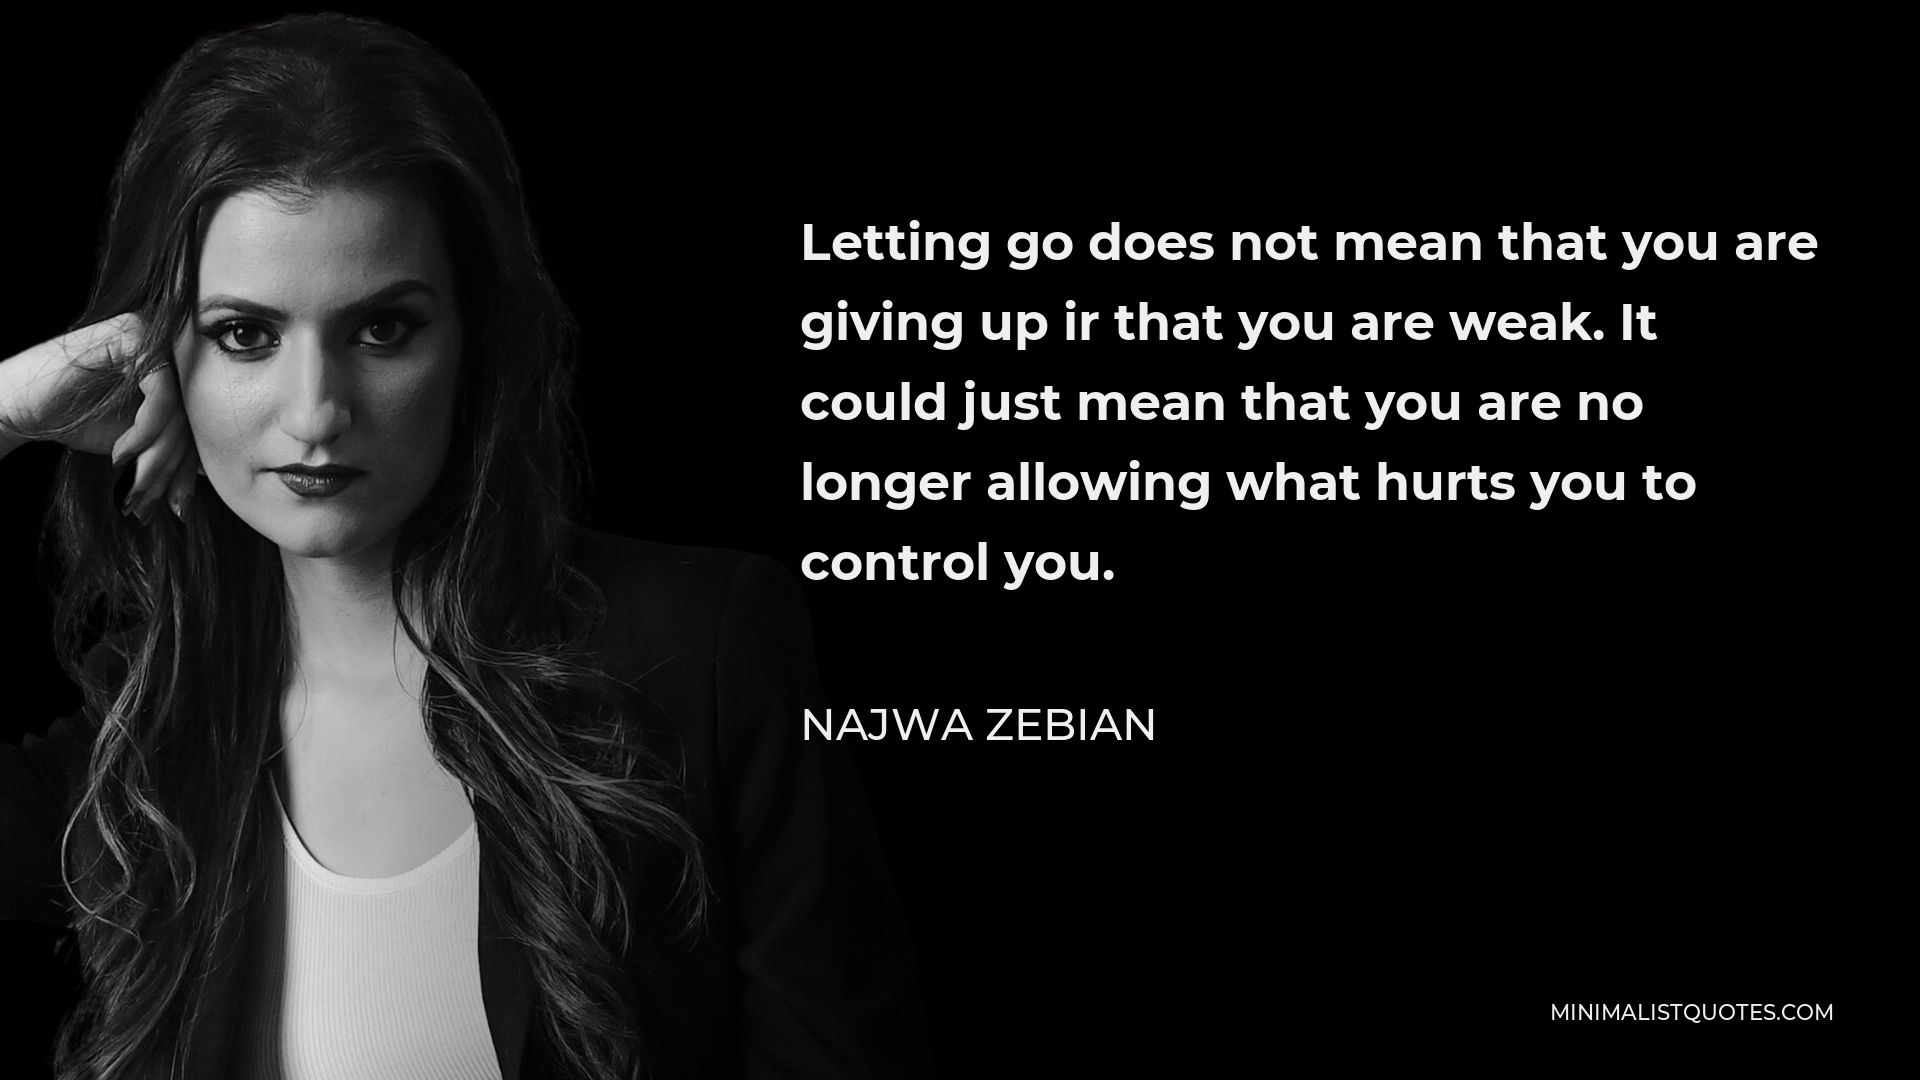 Najwa Zebian Quote - Letting go does not mean that you are giving up ir that you are weak. It could just mean that you are no longer allowing what hurts you to control you.